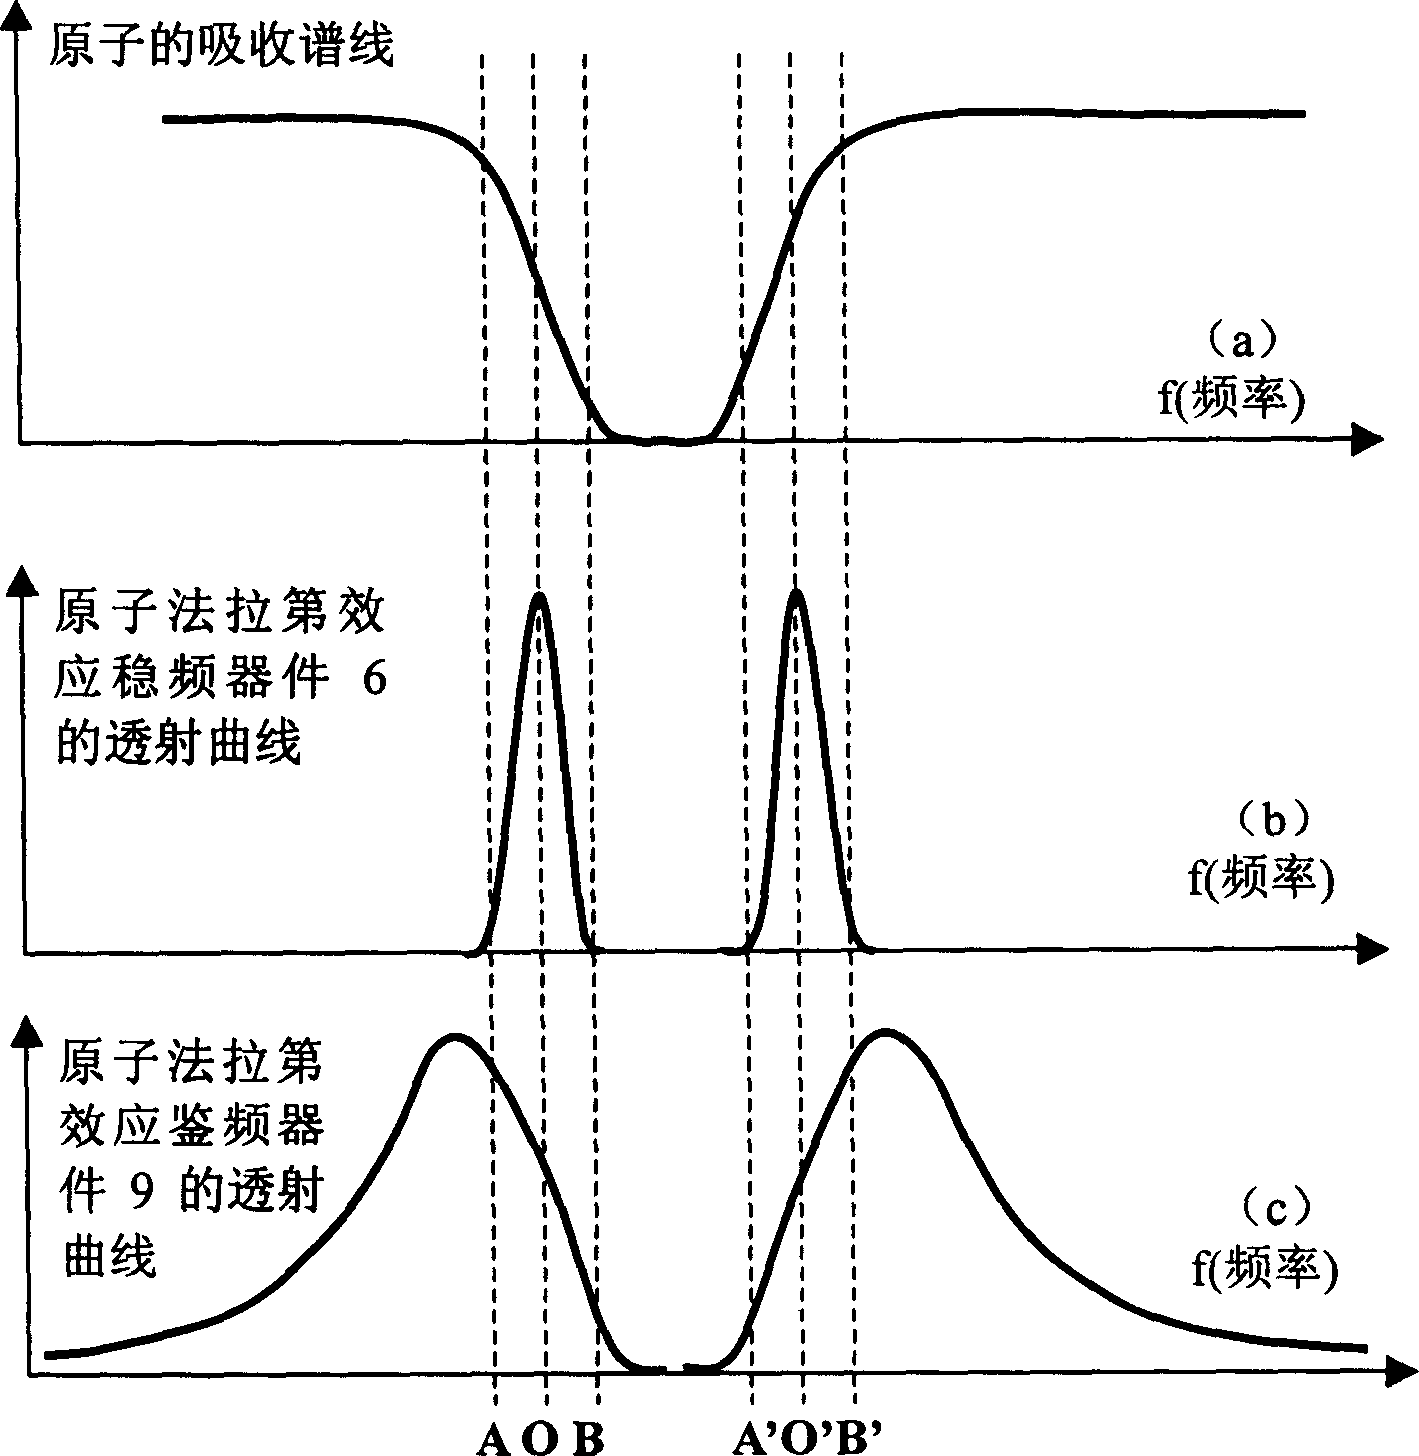 Laser doppler speed meter with atom Faraday frequency discrimination and stabilization